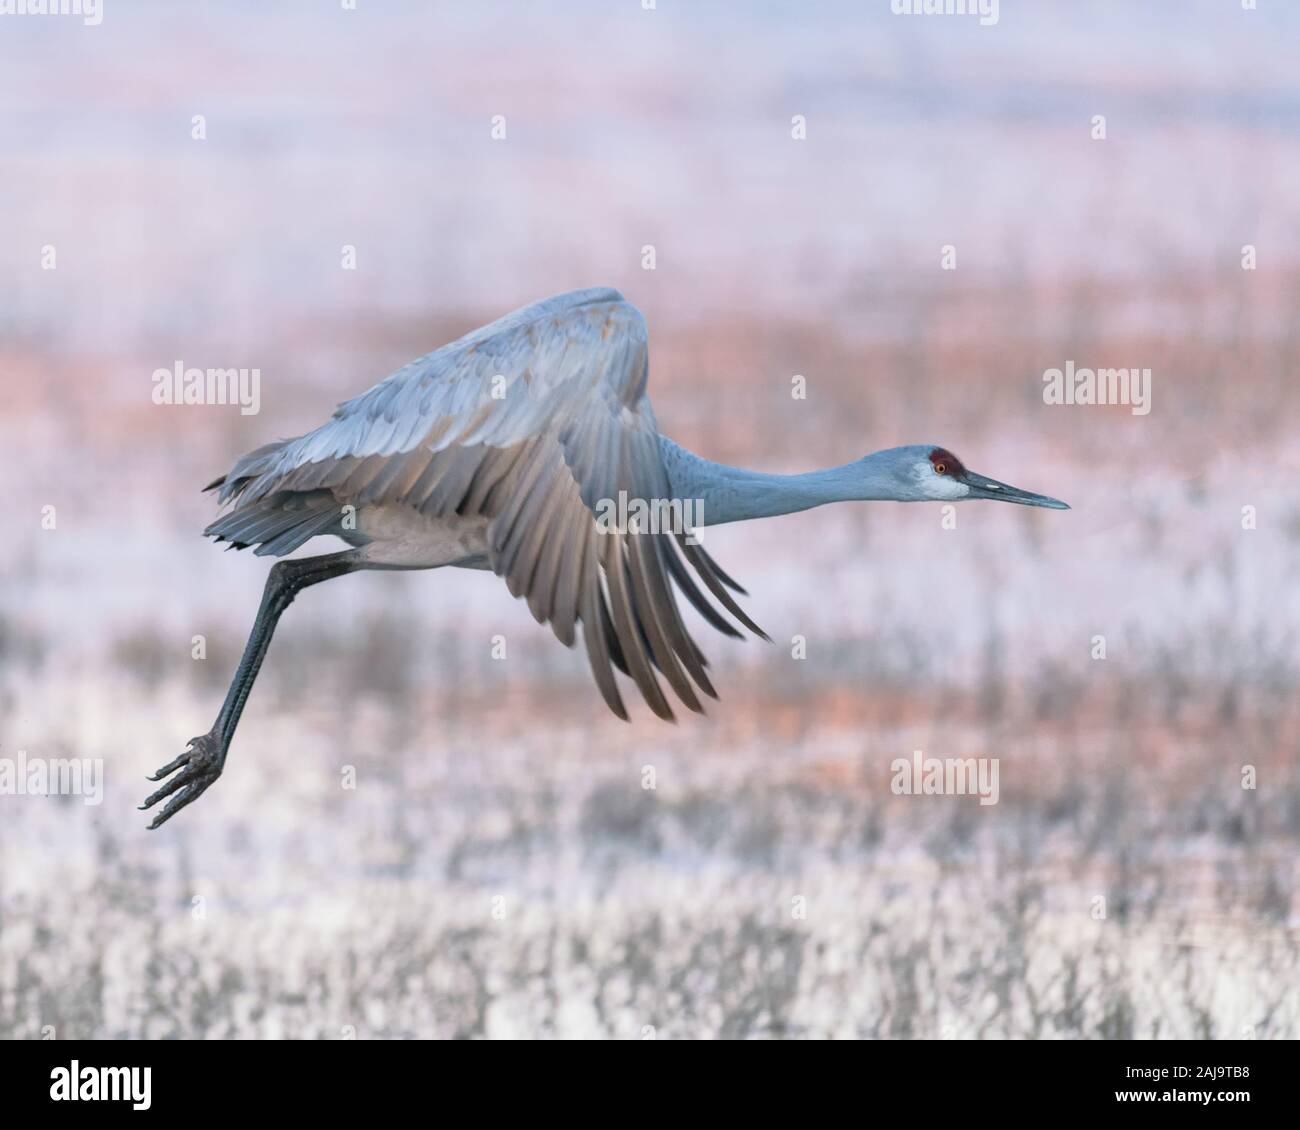 Sandhill crane flying over marsh at sunrise at the Bosque del Apache National Wildlife Refuge in New Mexico Stock Photo